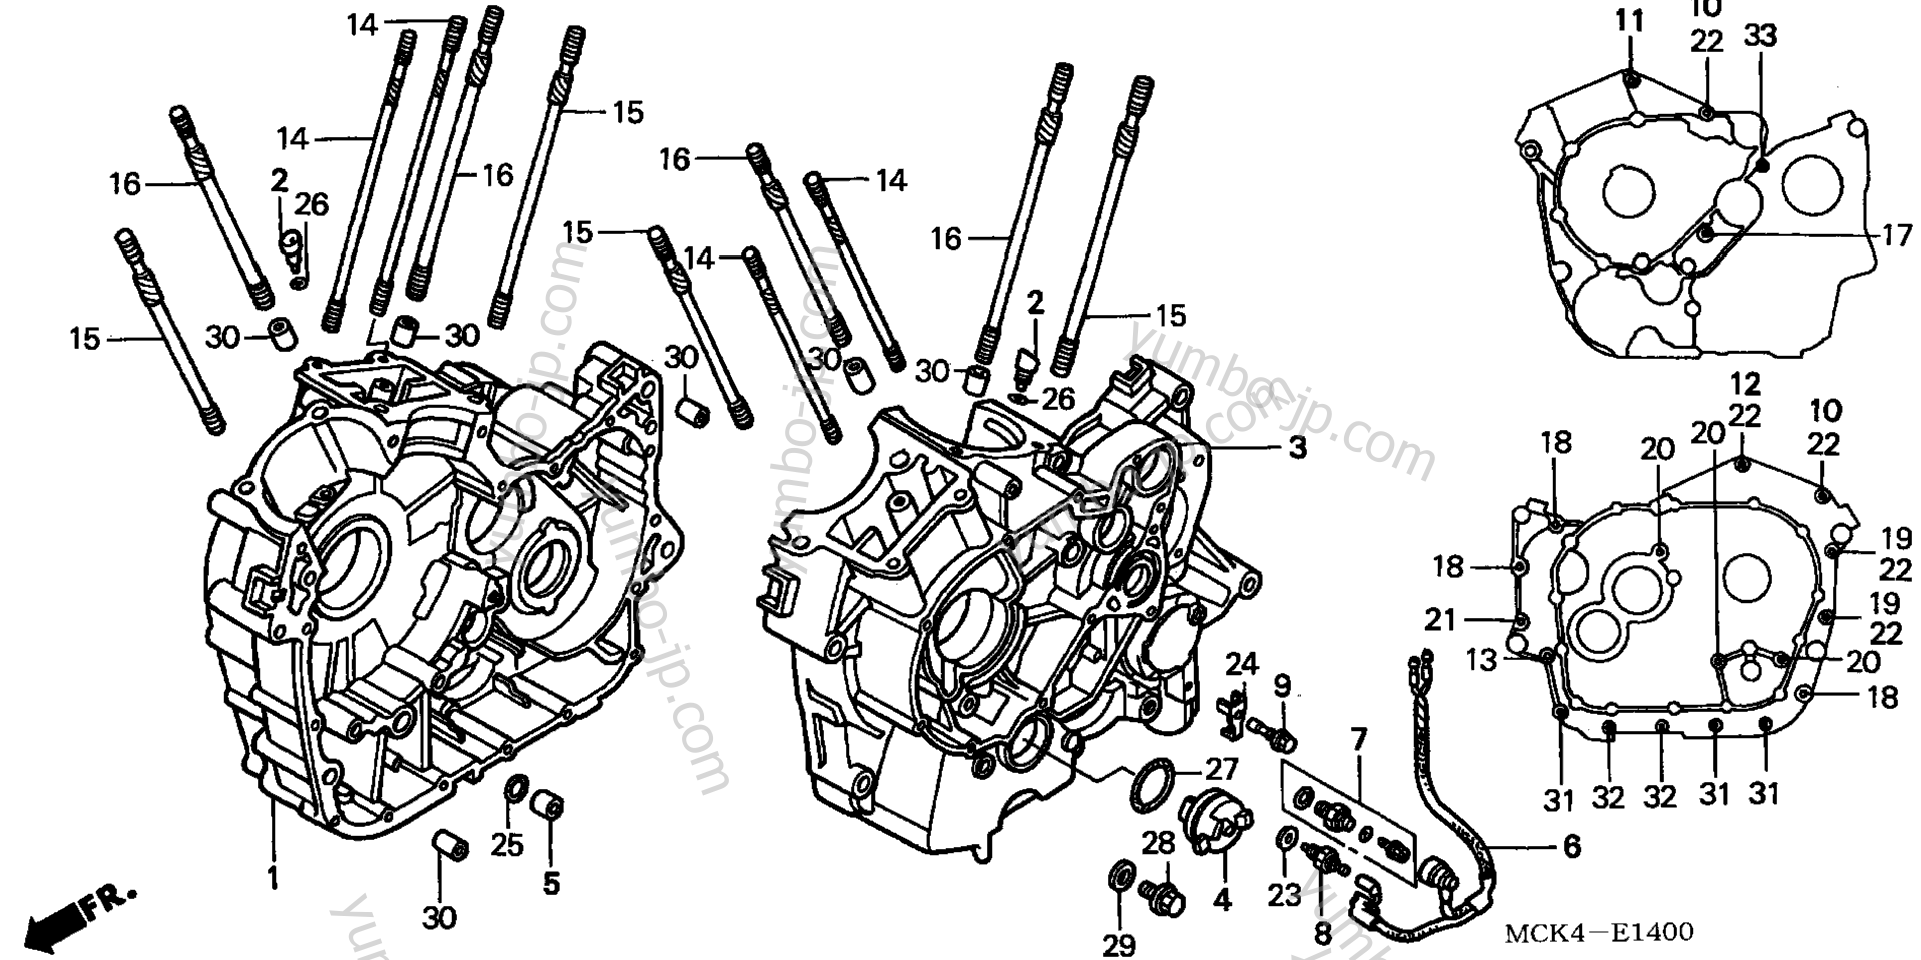 CRANKCASE for motorcycles HONDA VT1100C2 A 2001 year